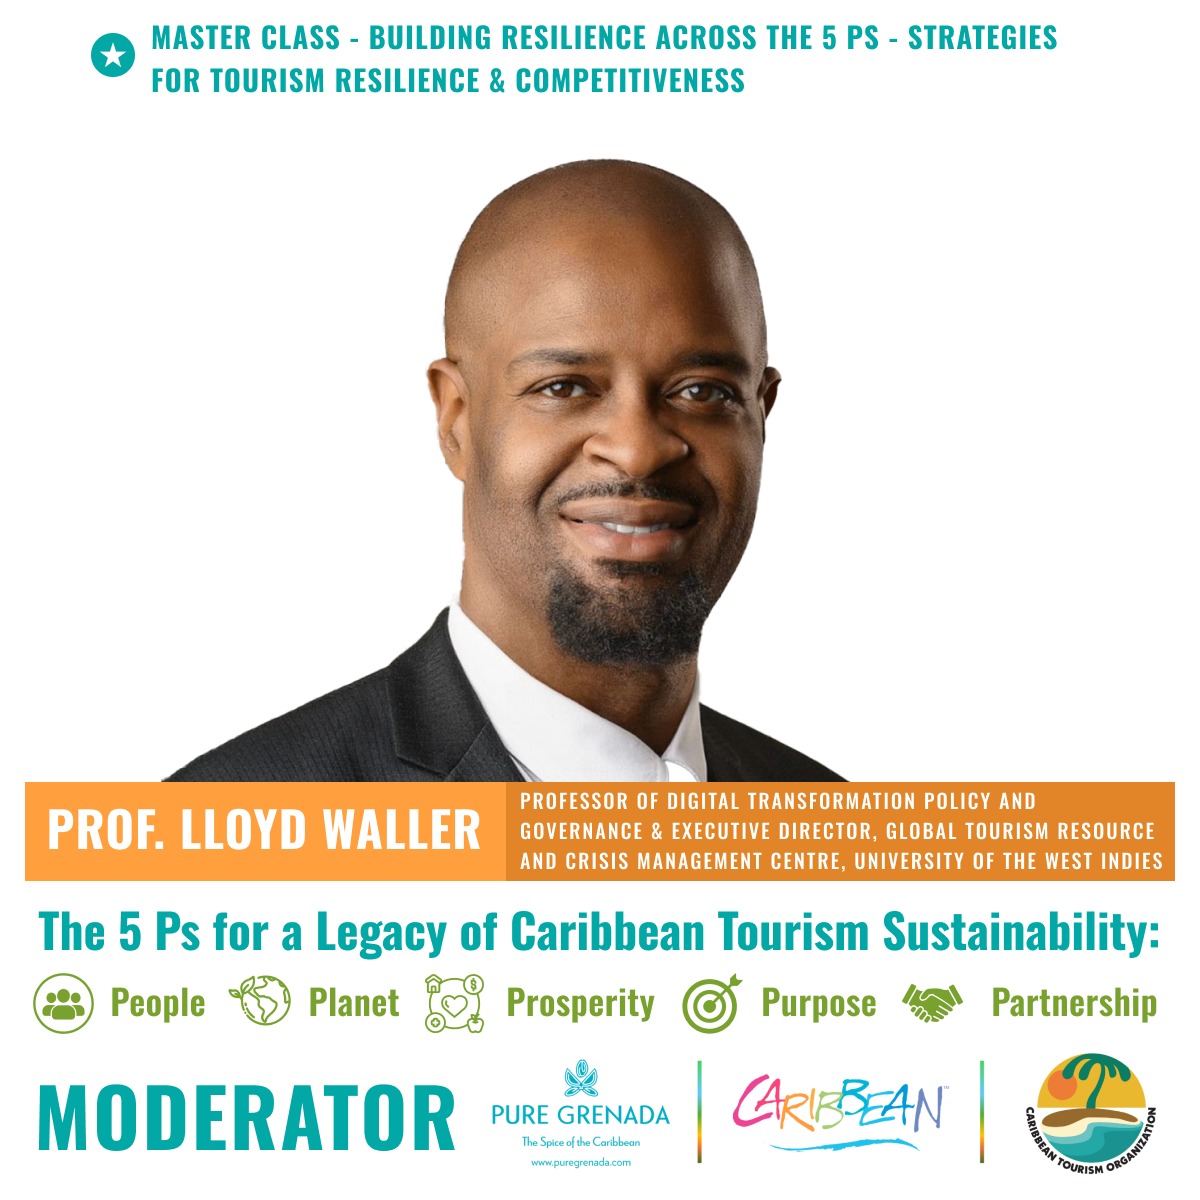 Many thanks to Professor Lloyd Waller from Jamaica, a leading advocate for tourism resilience in the Caribbean, who will join us in Grenada for a Master Class on this vital topic, especially in relation to competitiveness. caribbeanstc.com/speaker/prof-l…